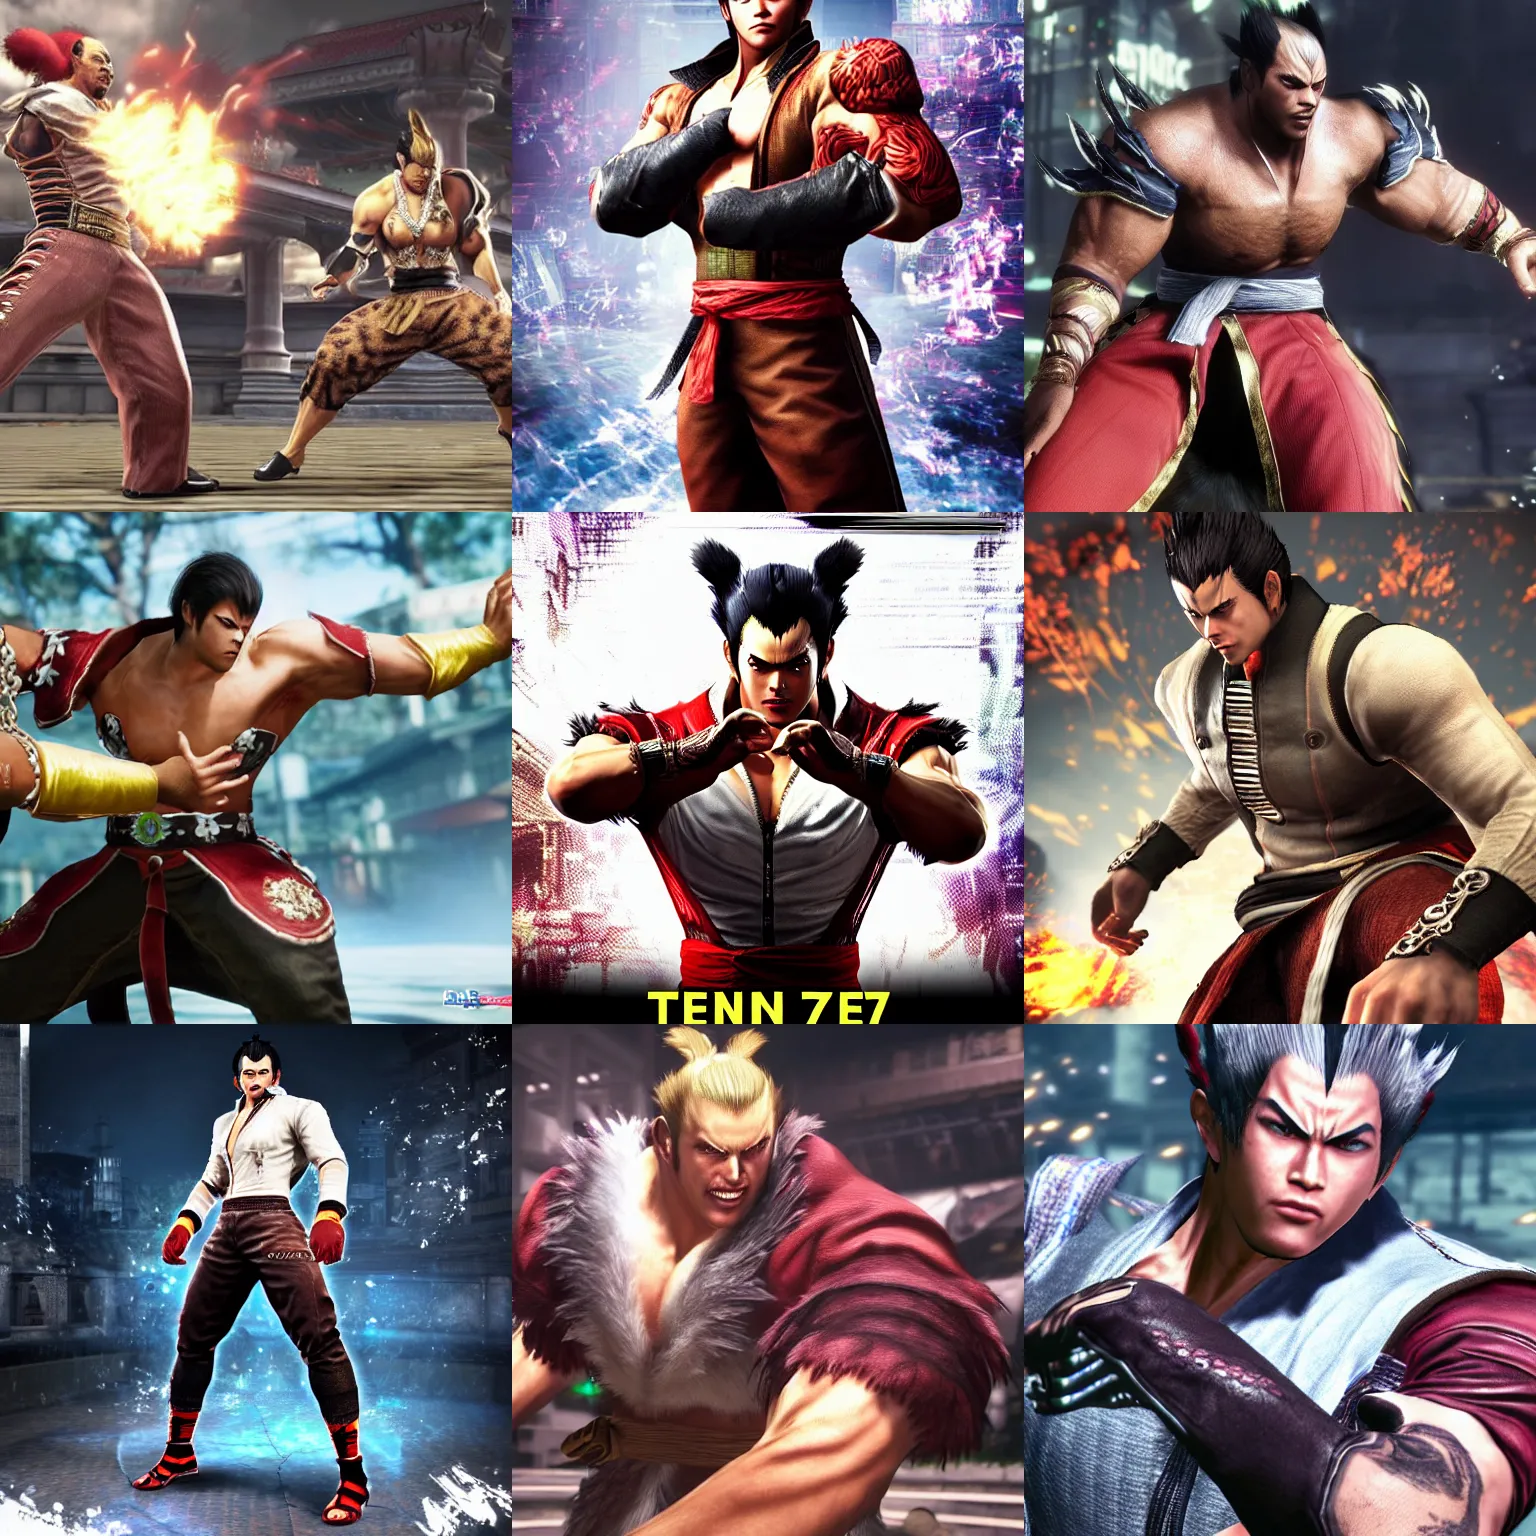 Prompt: The Character King from Tekken 7